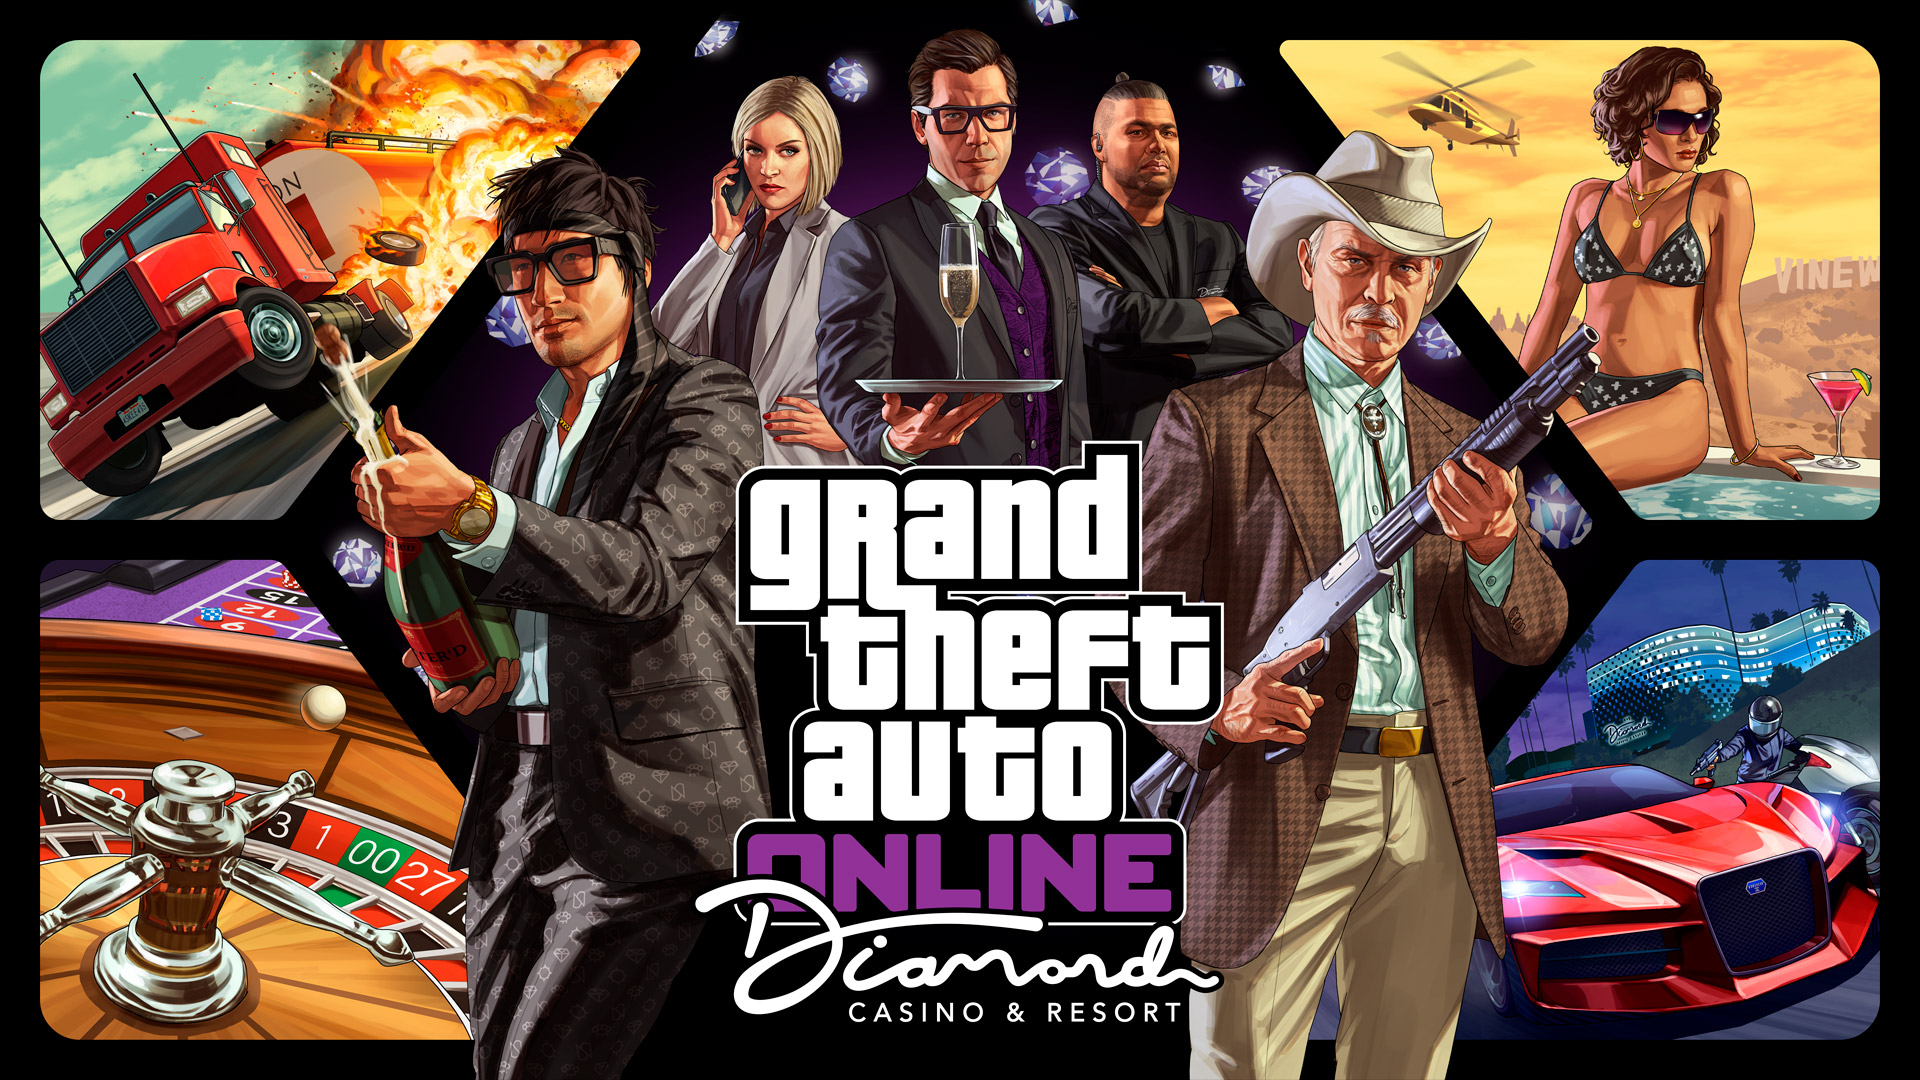 Download Patch Version 1 0 1734 0 The Diamond Casino Resort For Gta 5 Online On Pc